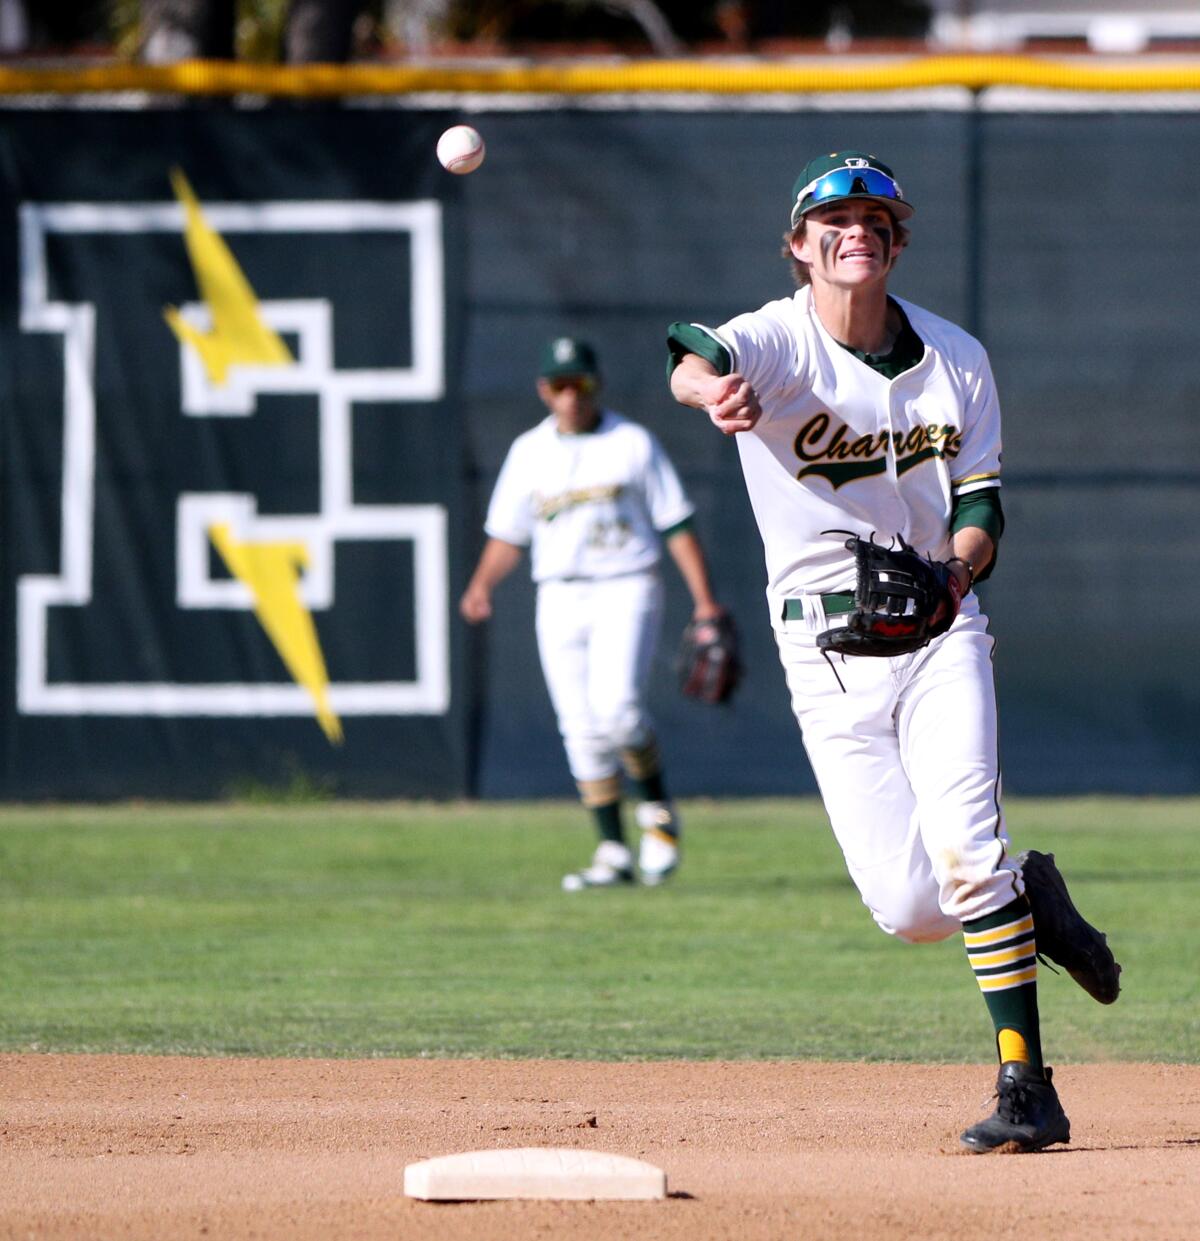 Edison infielder Tyler Weaver, shown throwing out a runner on March 6 against Laguna Beach, was honored as a Sunset Conference "Dream Team" selection.